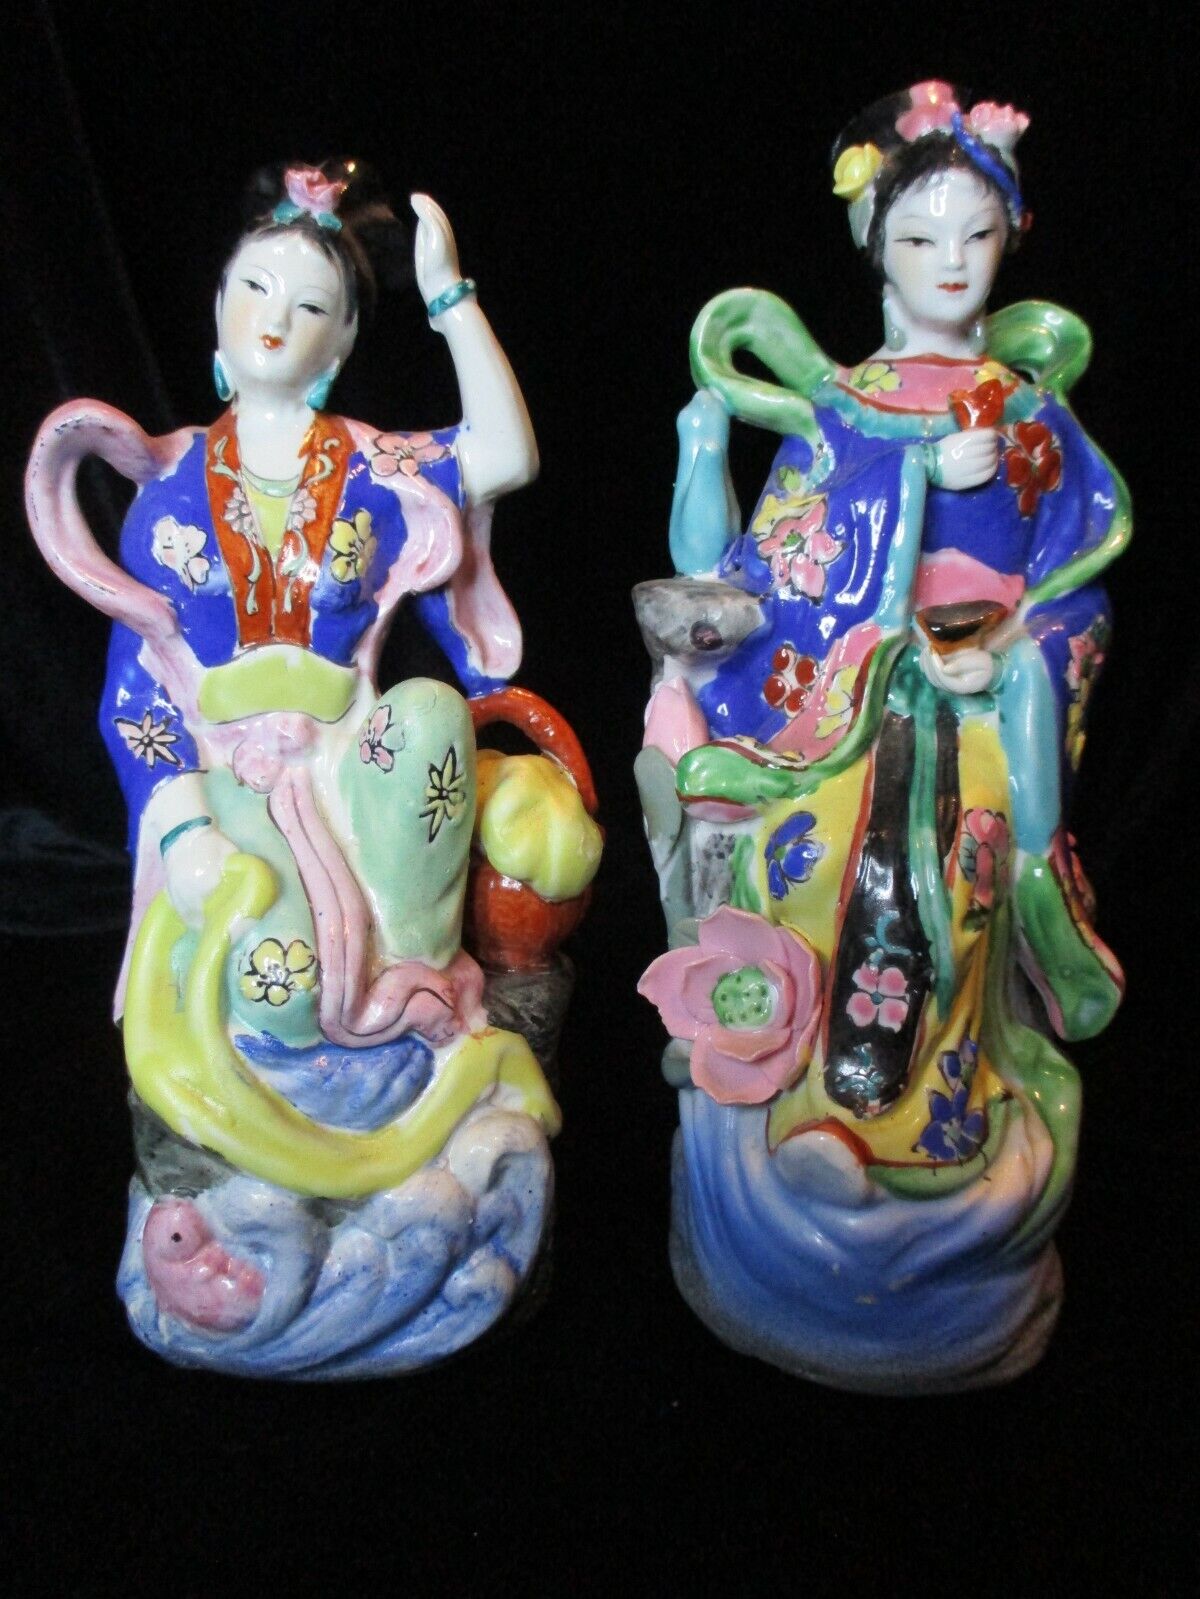 VINTAGE RARE PAIR CHINESE WOMEN RAISED FLOWERS IN HAIR & DRESS MANY DETAILS